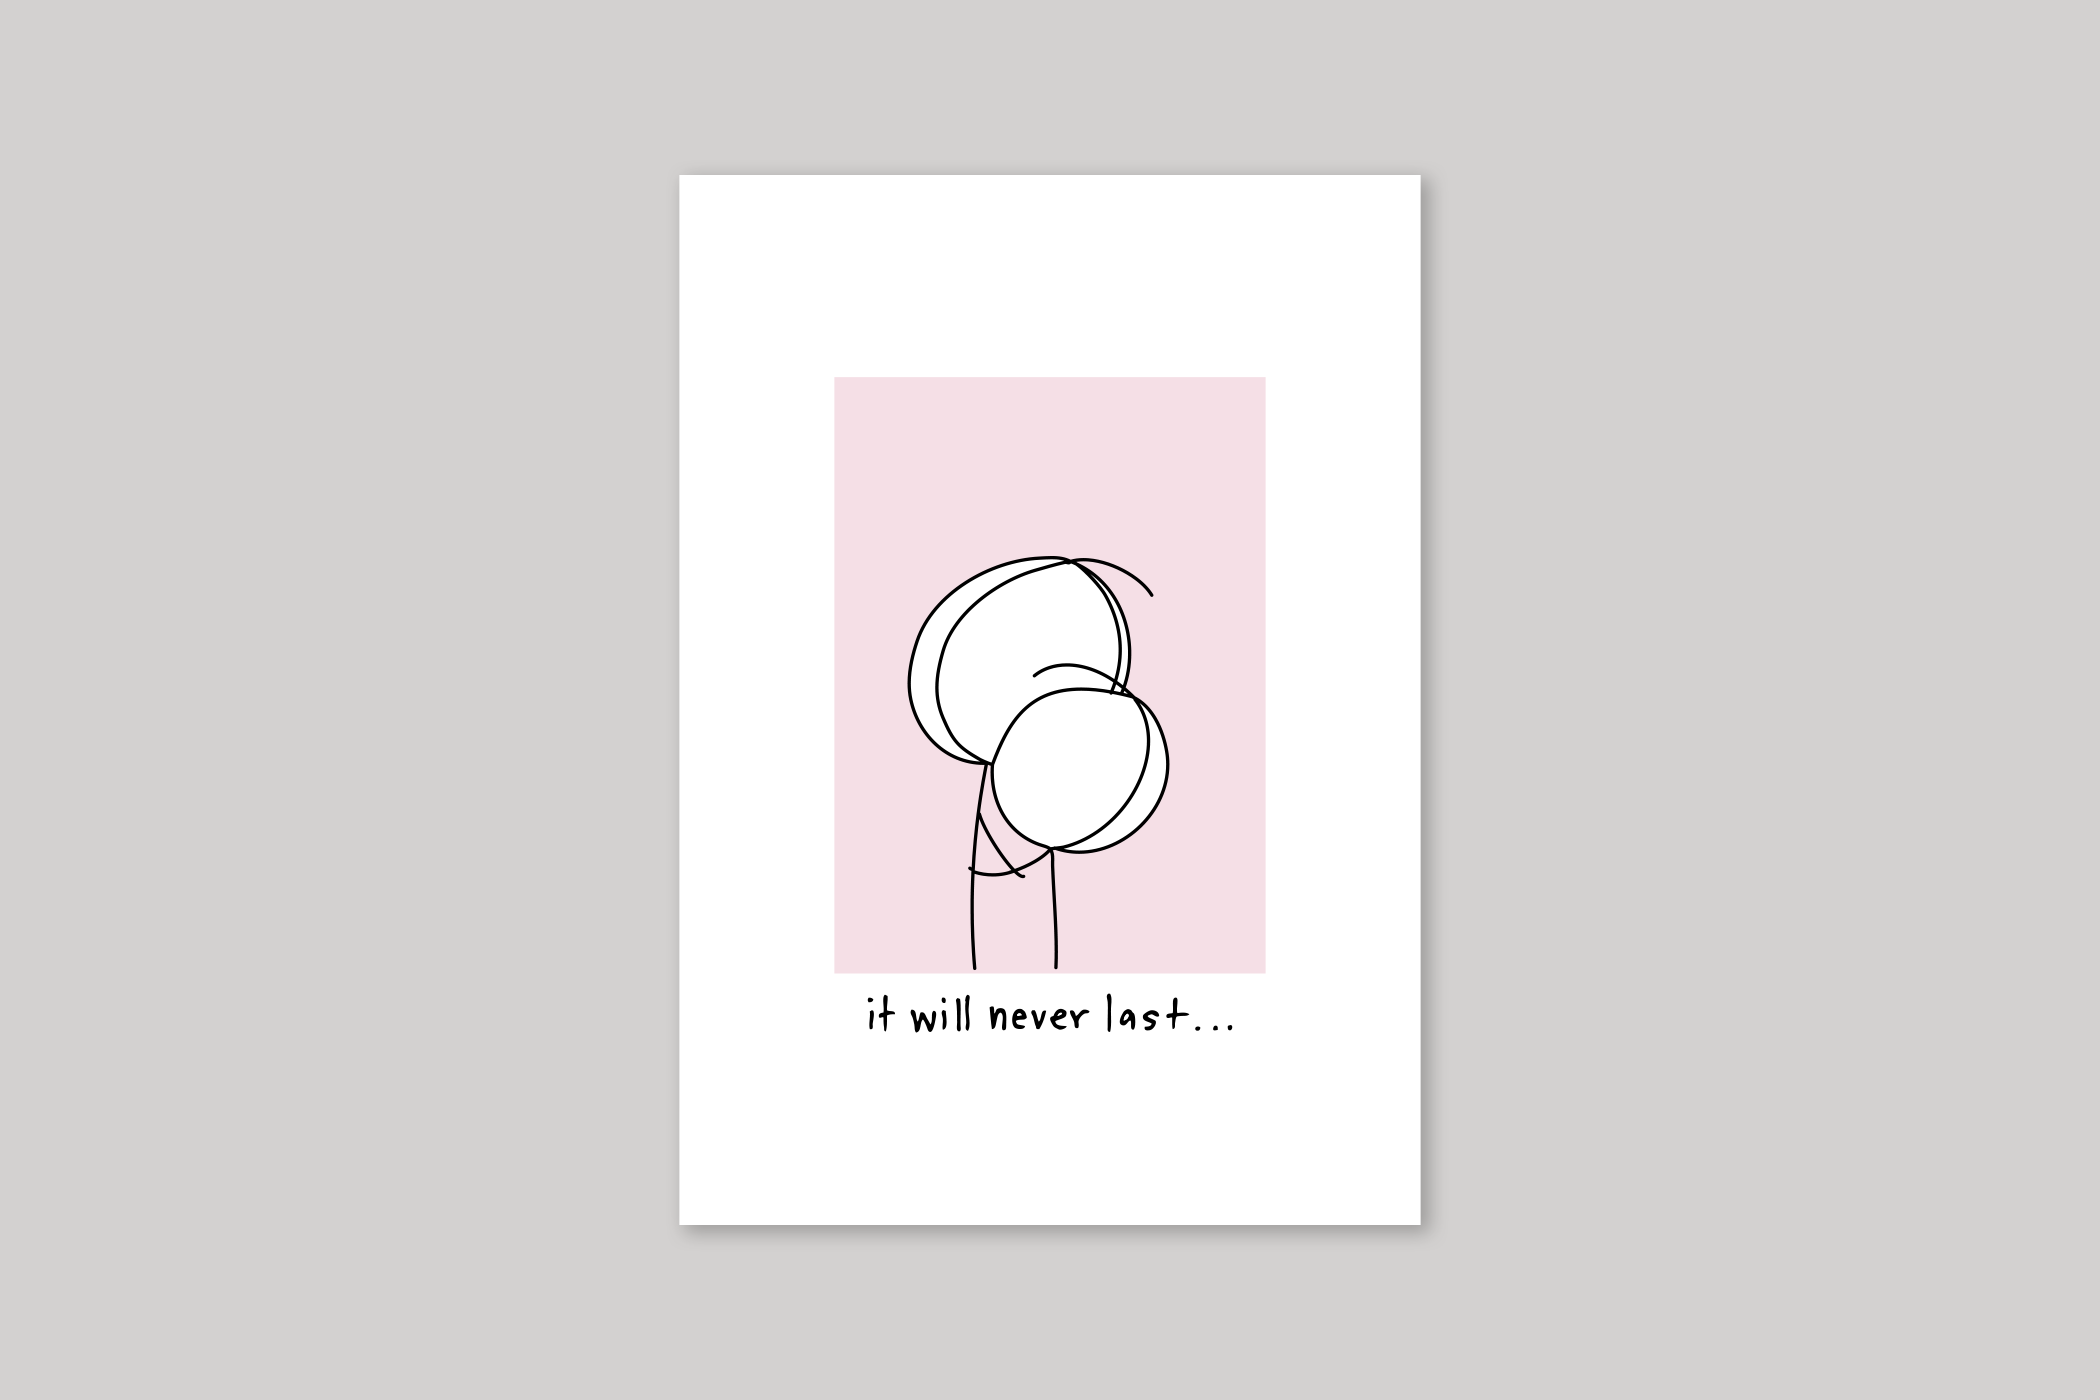 It Will Never Last engagement card humorous illustration from Mean Cards range of greeting cards by Icon.